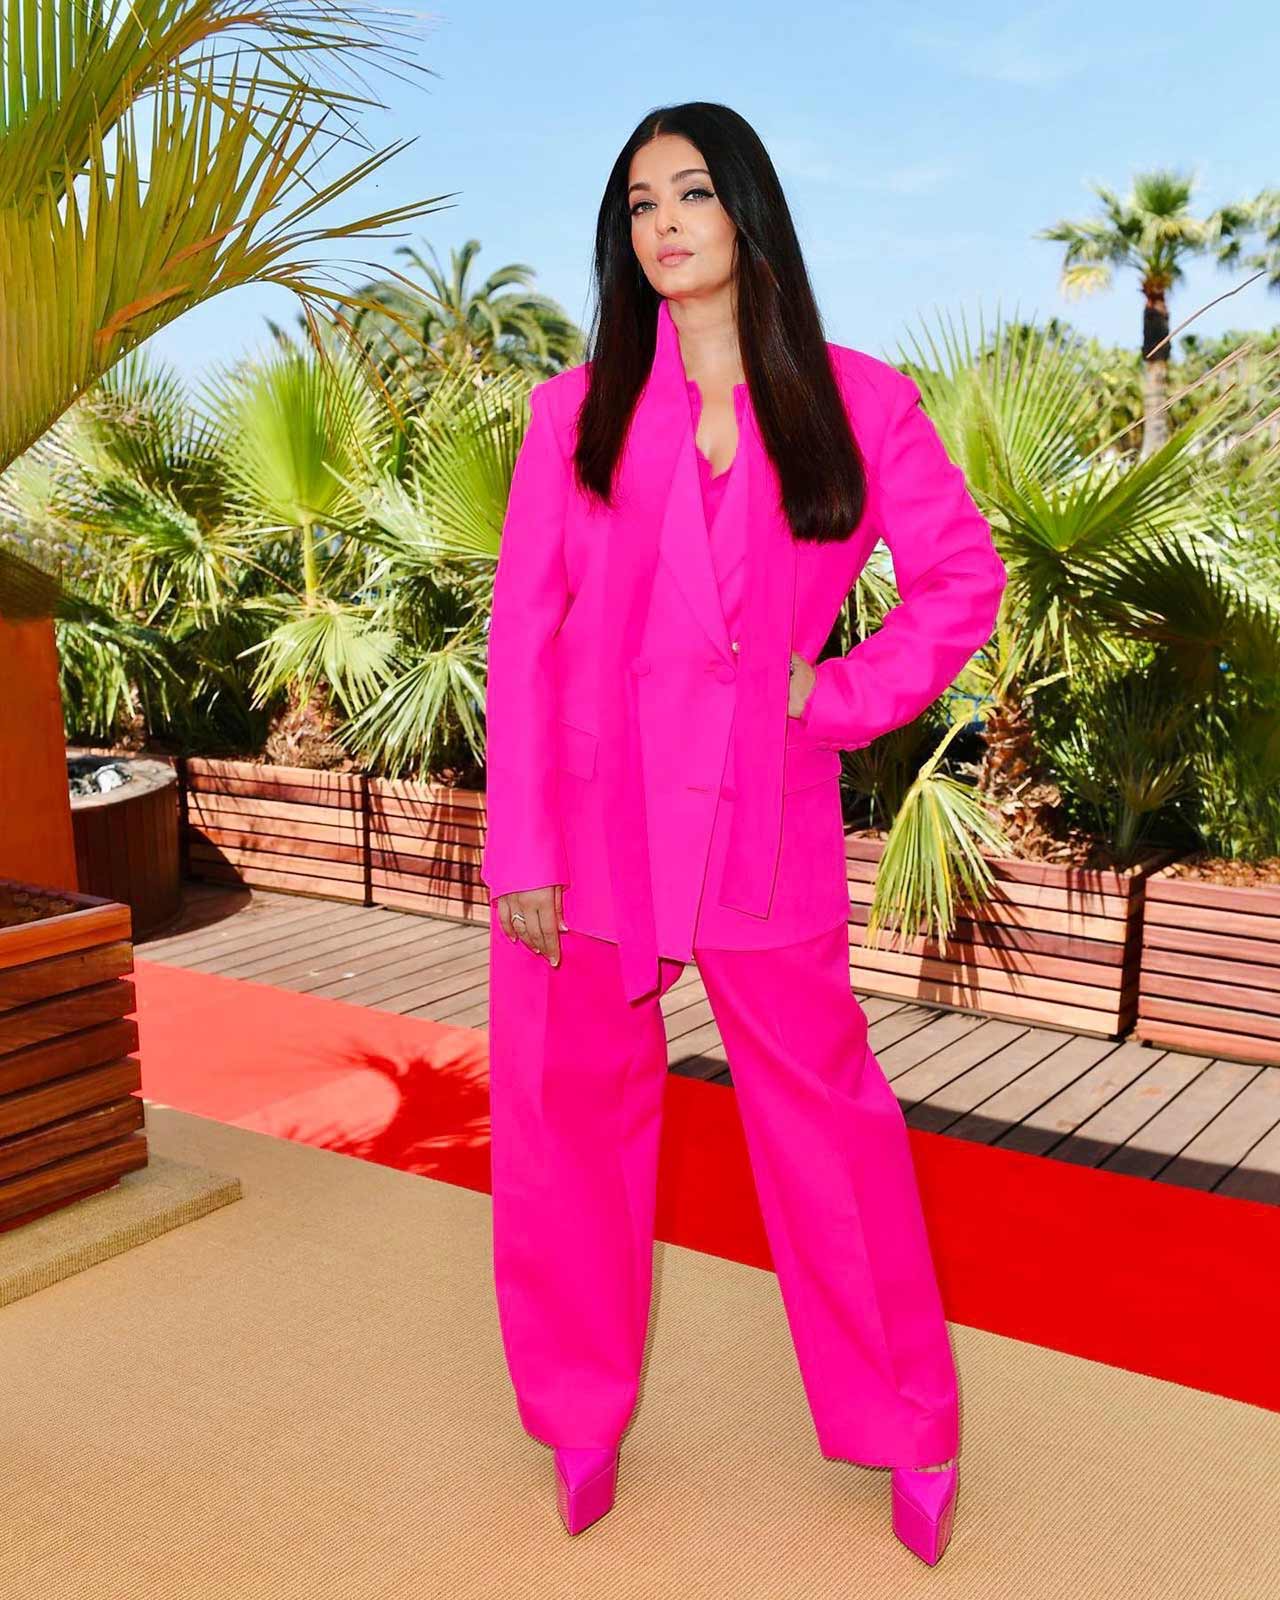 Actor Aishwarya Rai Bachchan chose to wear a pink blazer with matching trousers. She elevated her look with a pair of pink heels. As for her glam game, she opted for minimal makeup with her hair open.